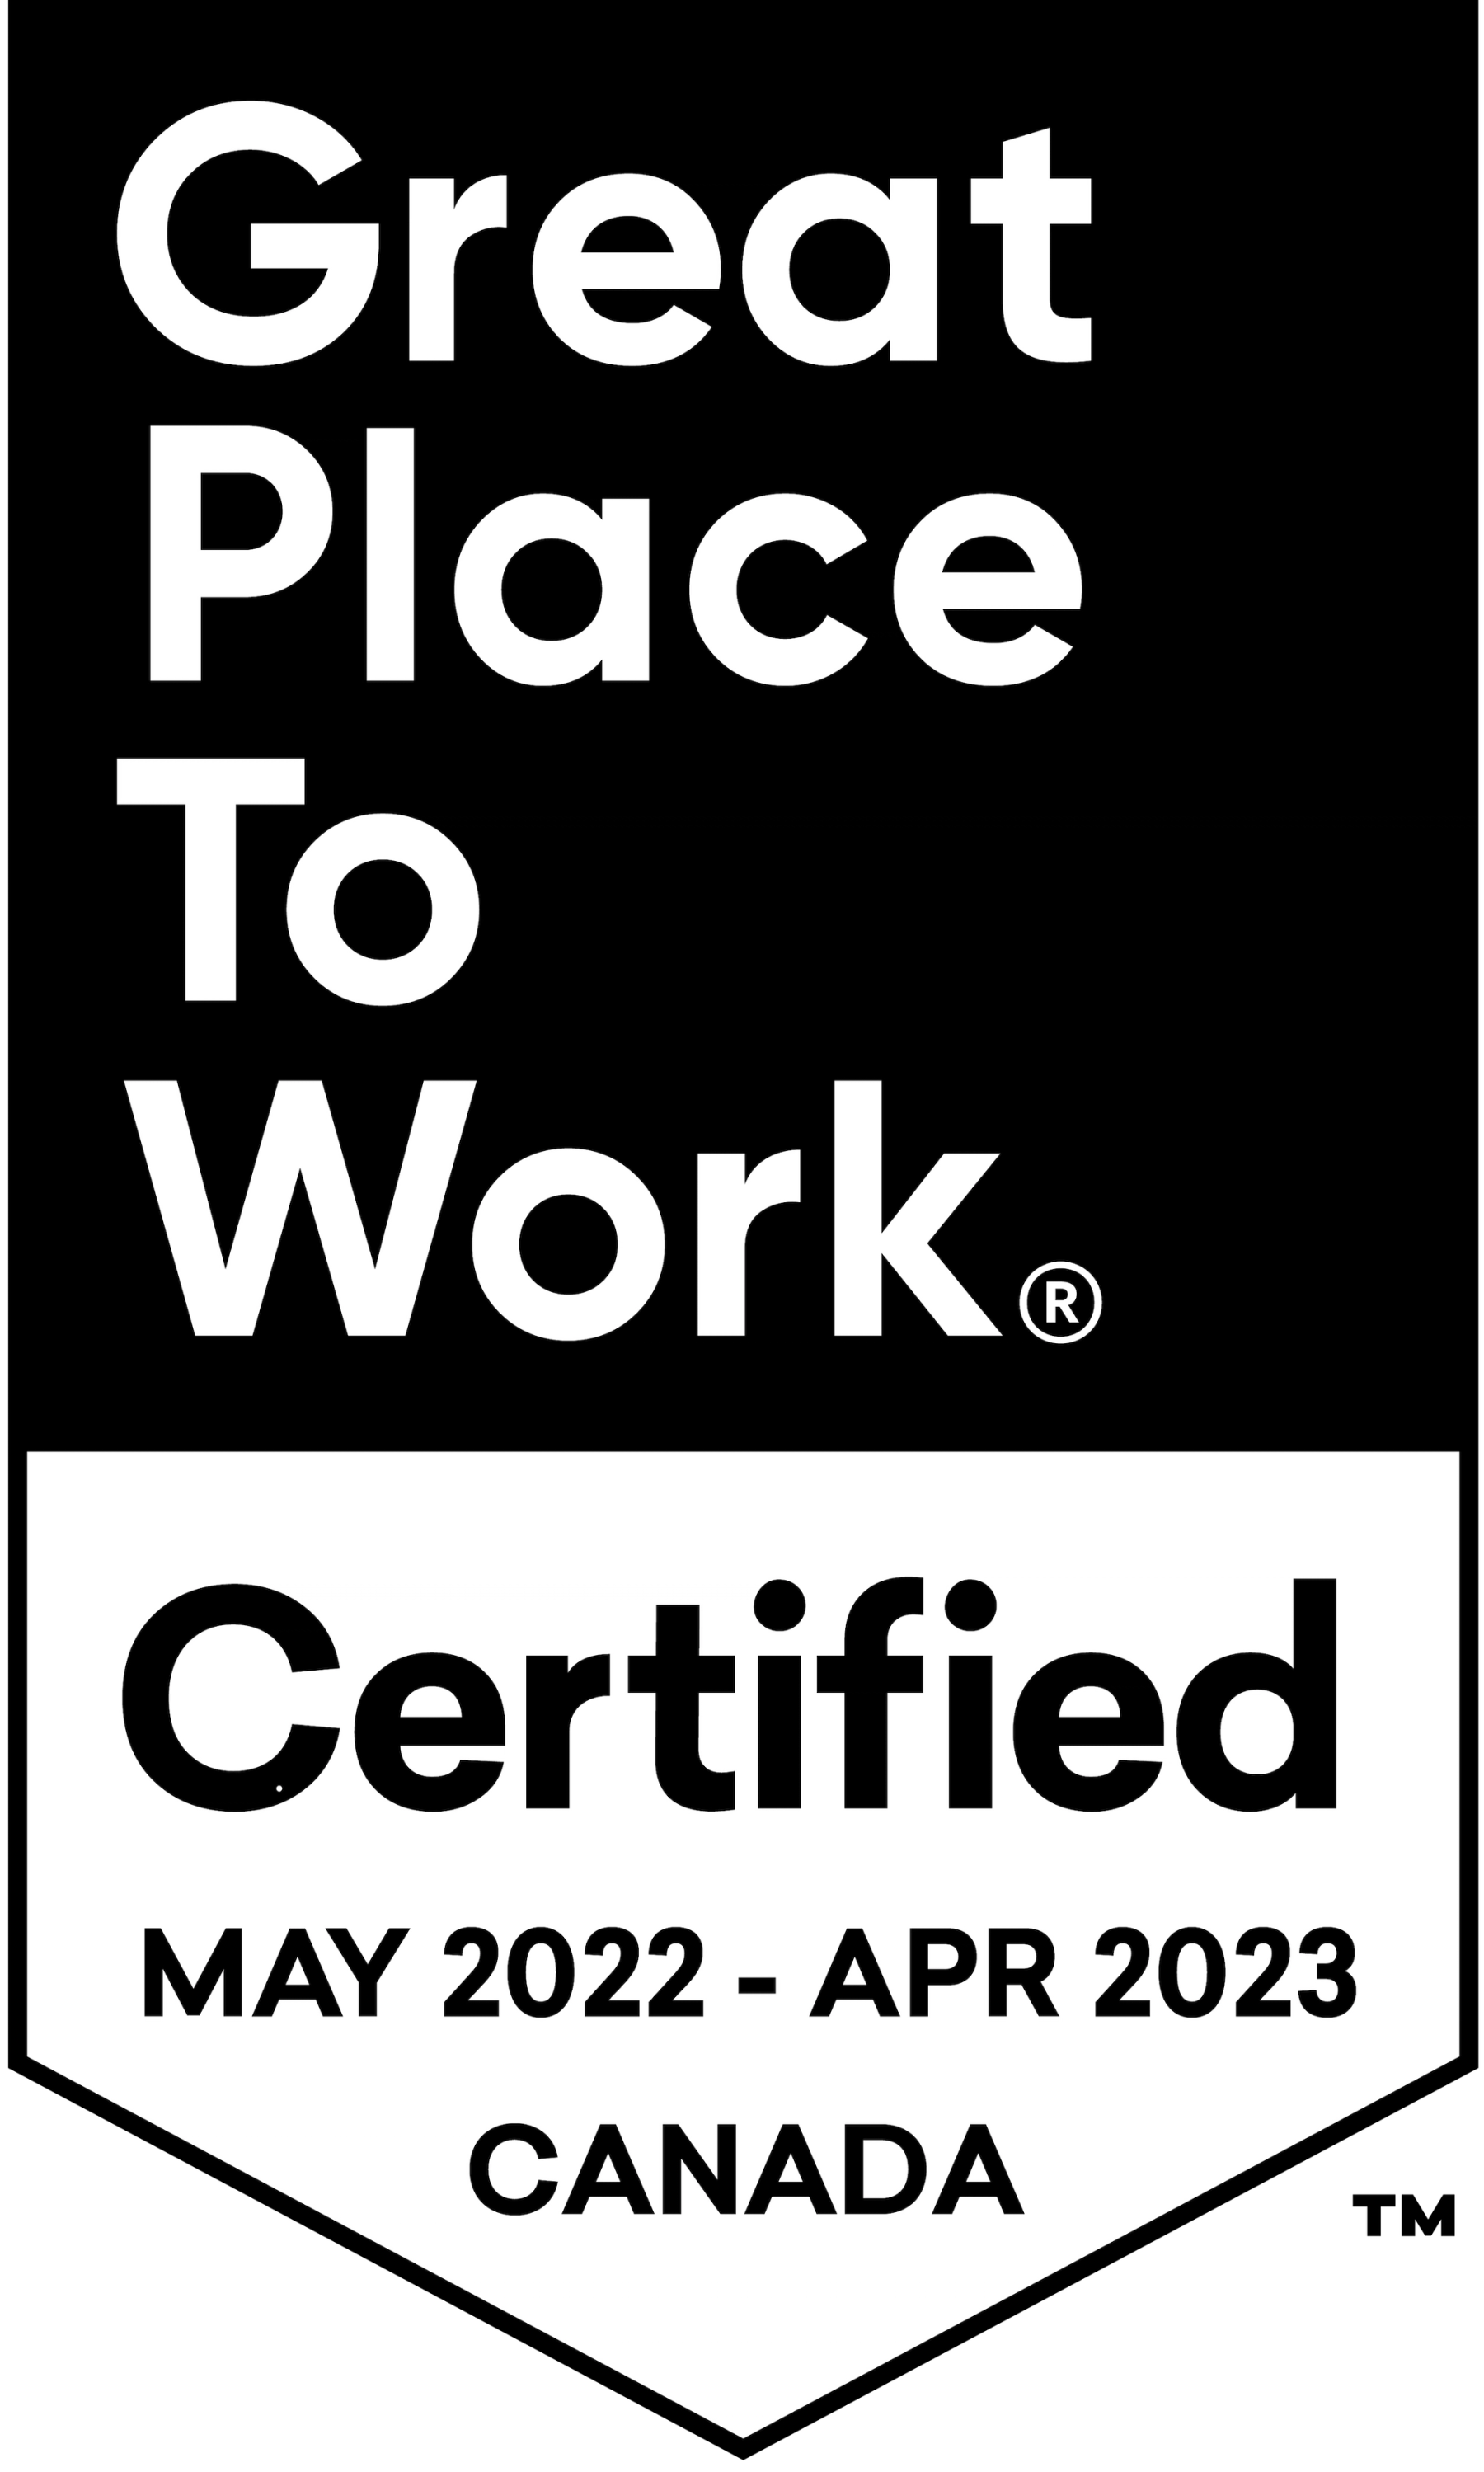 Great Place to Work Certification Badge, for May 2022 - April 2023 in Canada